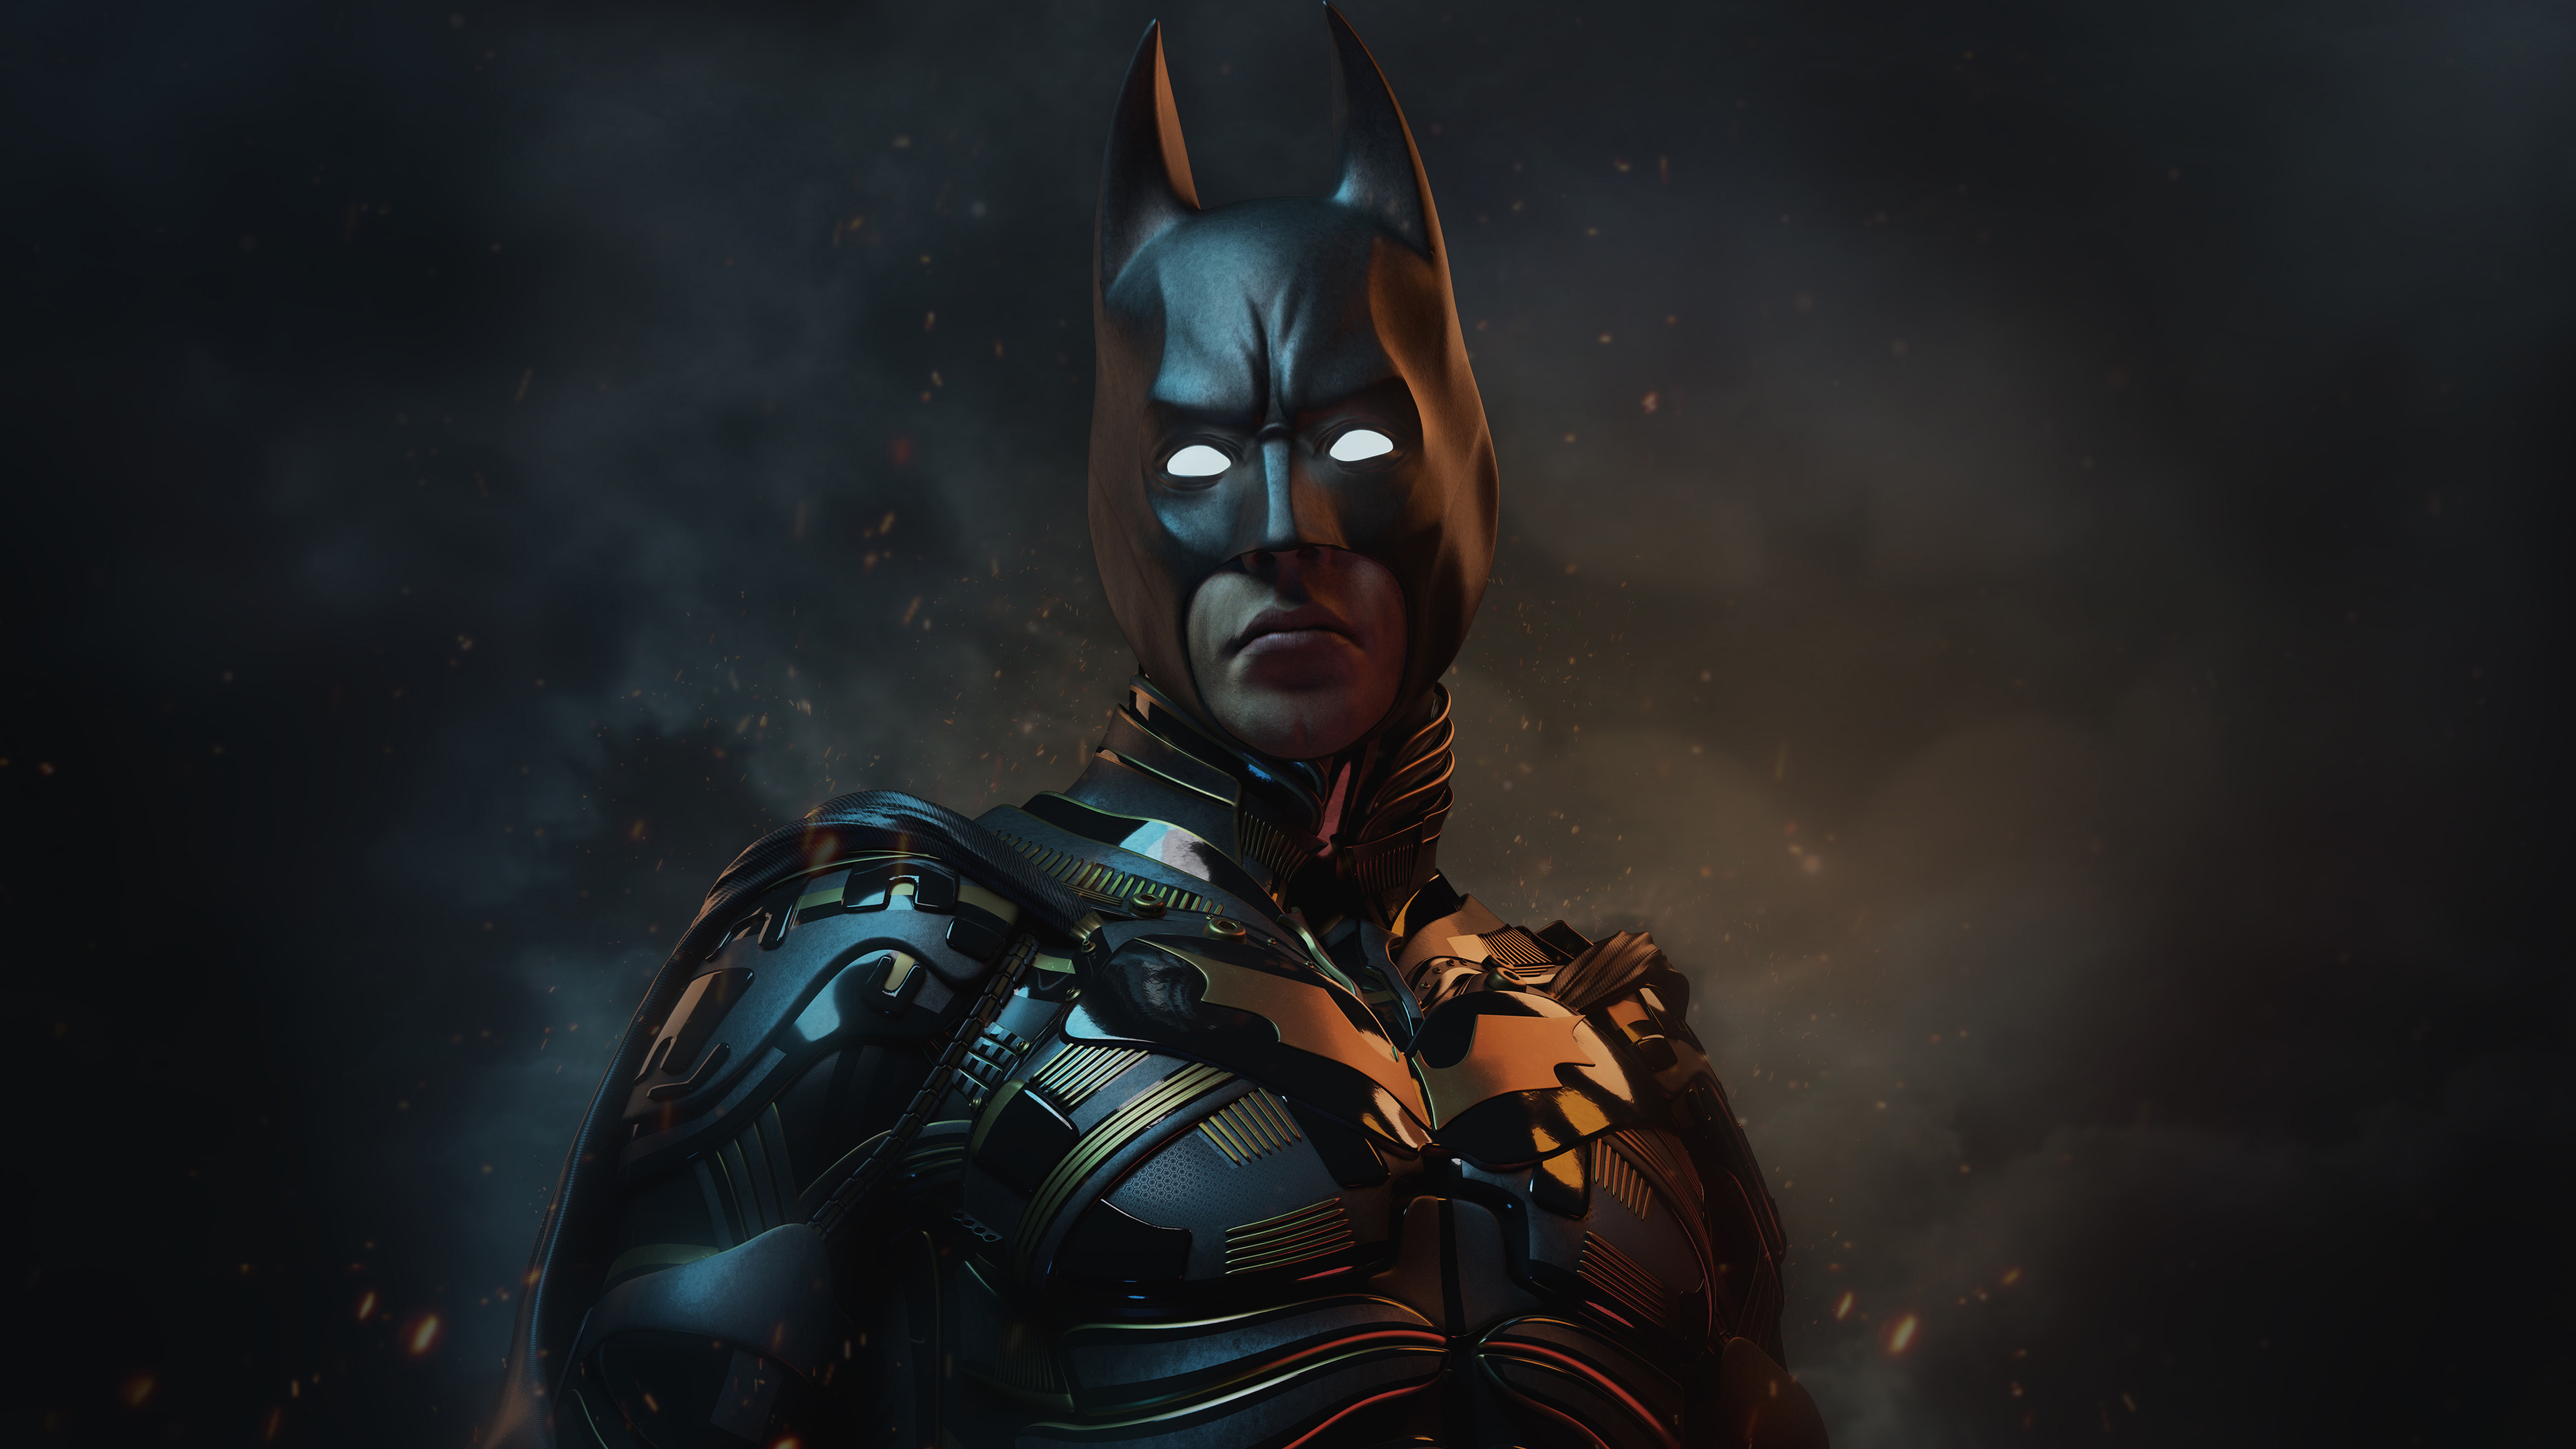 Batman k wallpapers for your desktop or mobile screen free and easy to download